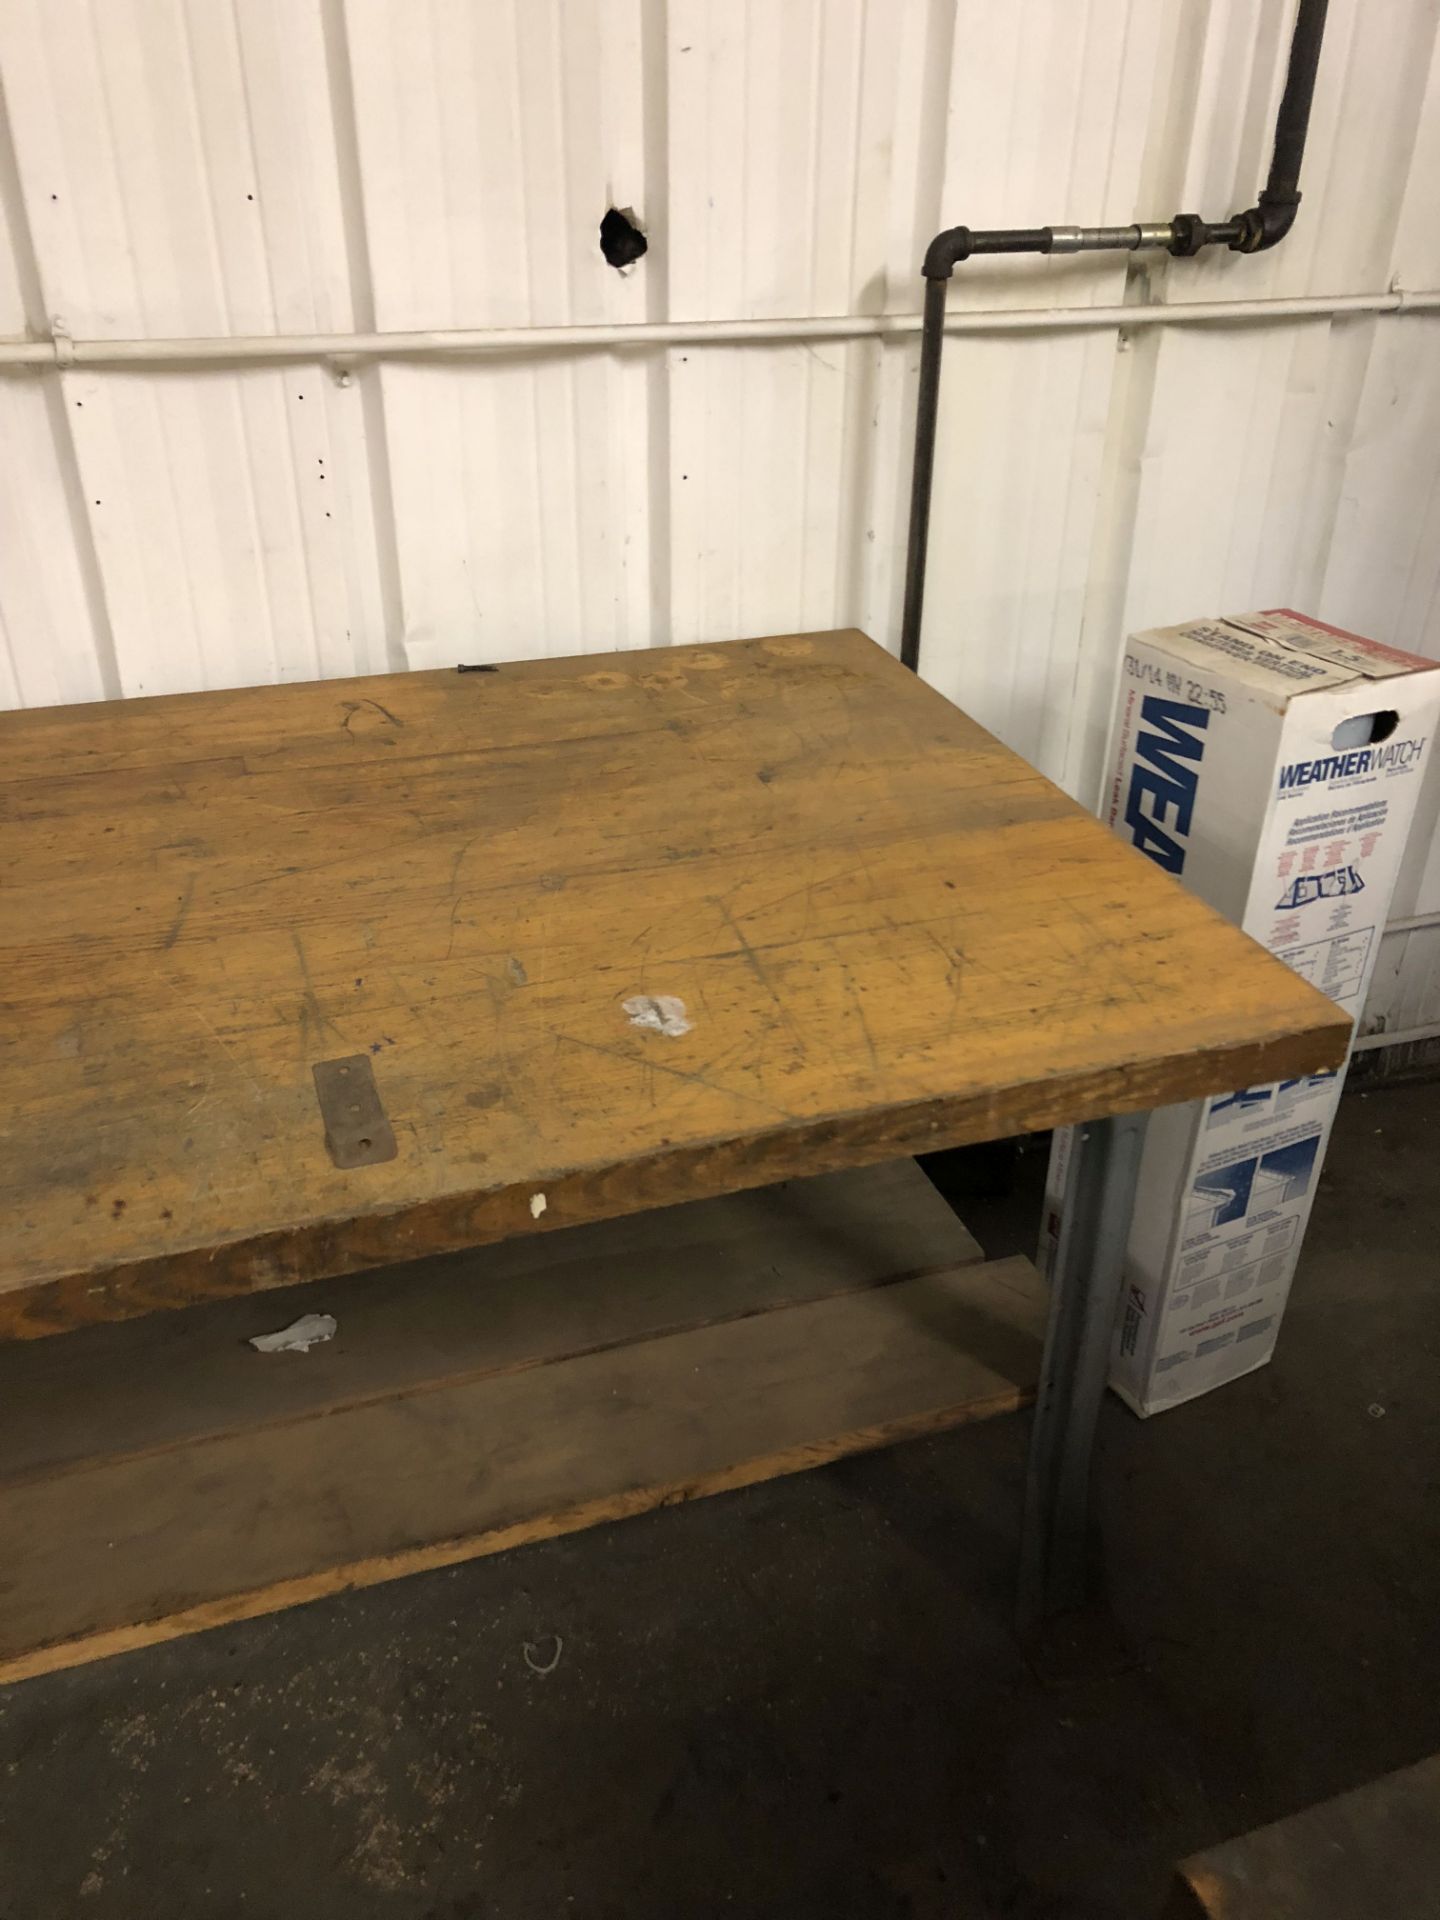 METAL WORK BENCH WITH WOOD TOP, 6' LONG x 3' WIDE x 34'' TALL [CONTENTS ON BENCH NOT INCLUDED] [ - Image 3 of 3